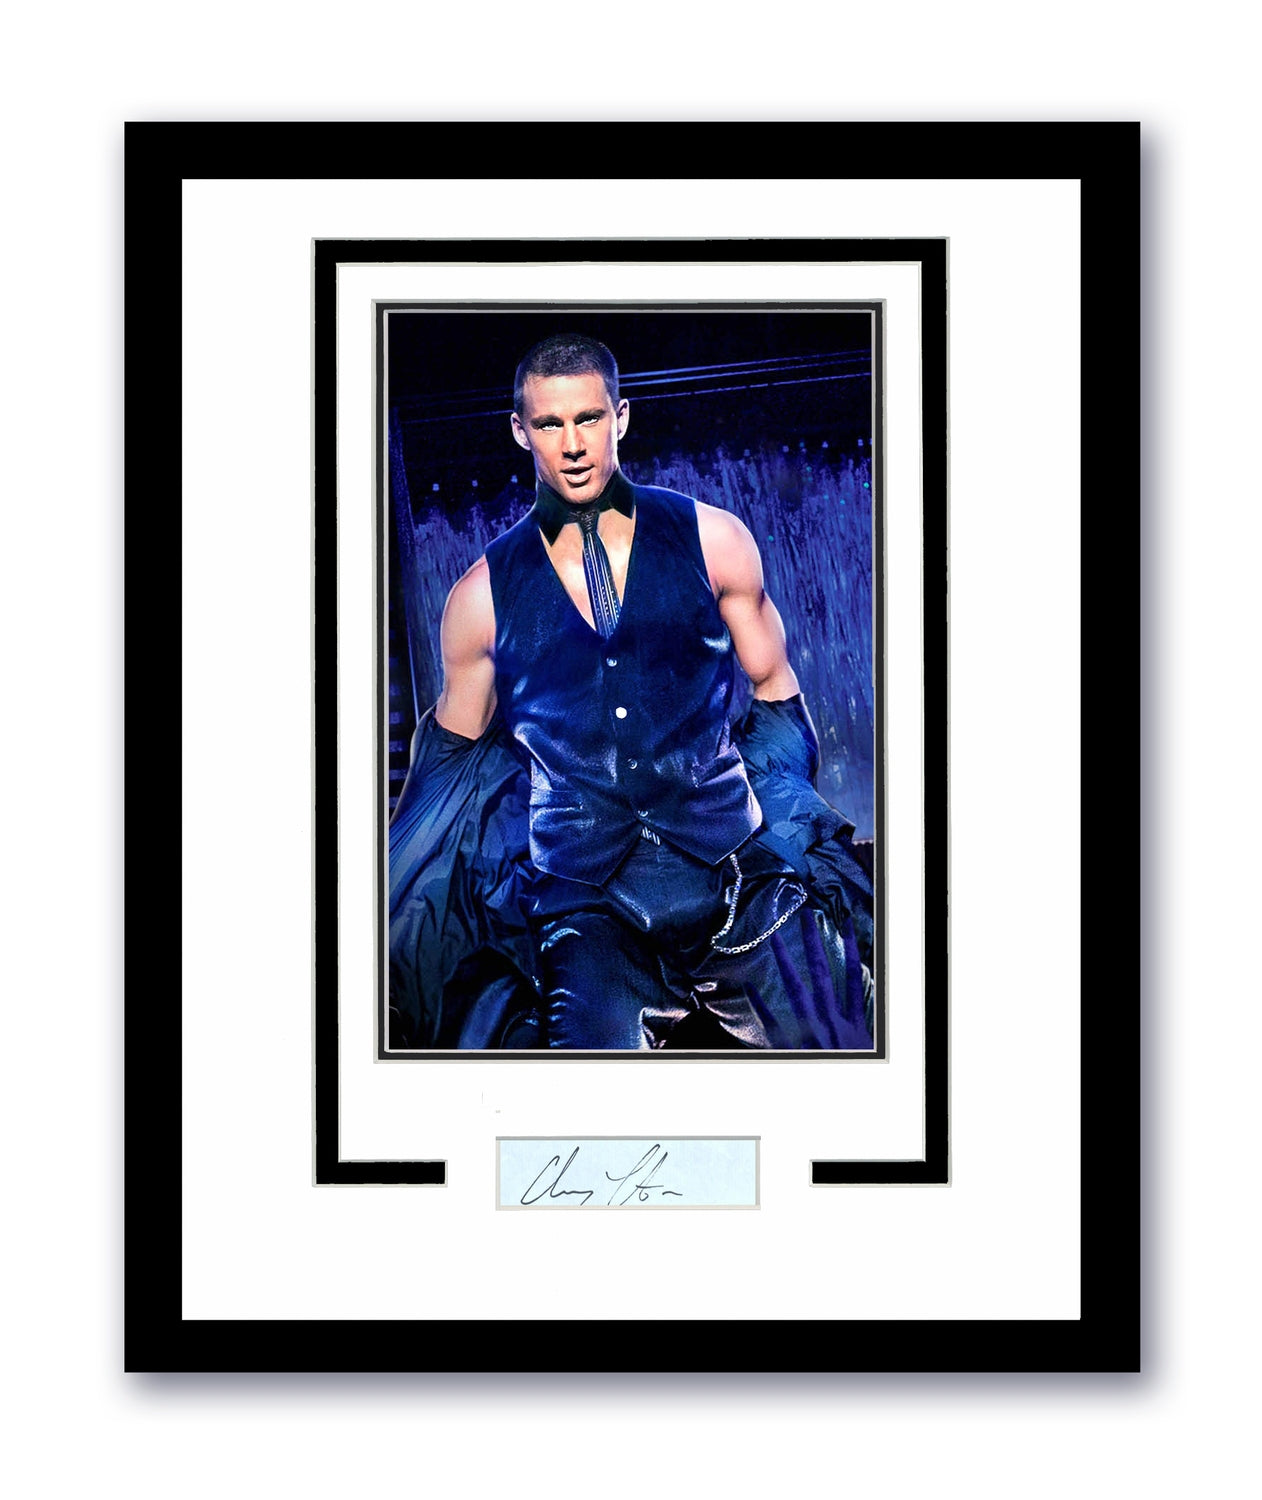 Magic Mike Channing Tatum Autographed Signed 11x14 Framed Poster Photo ACOA 2